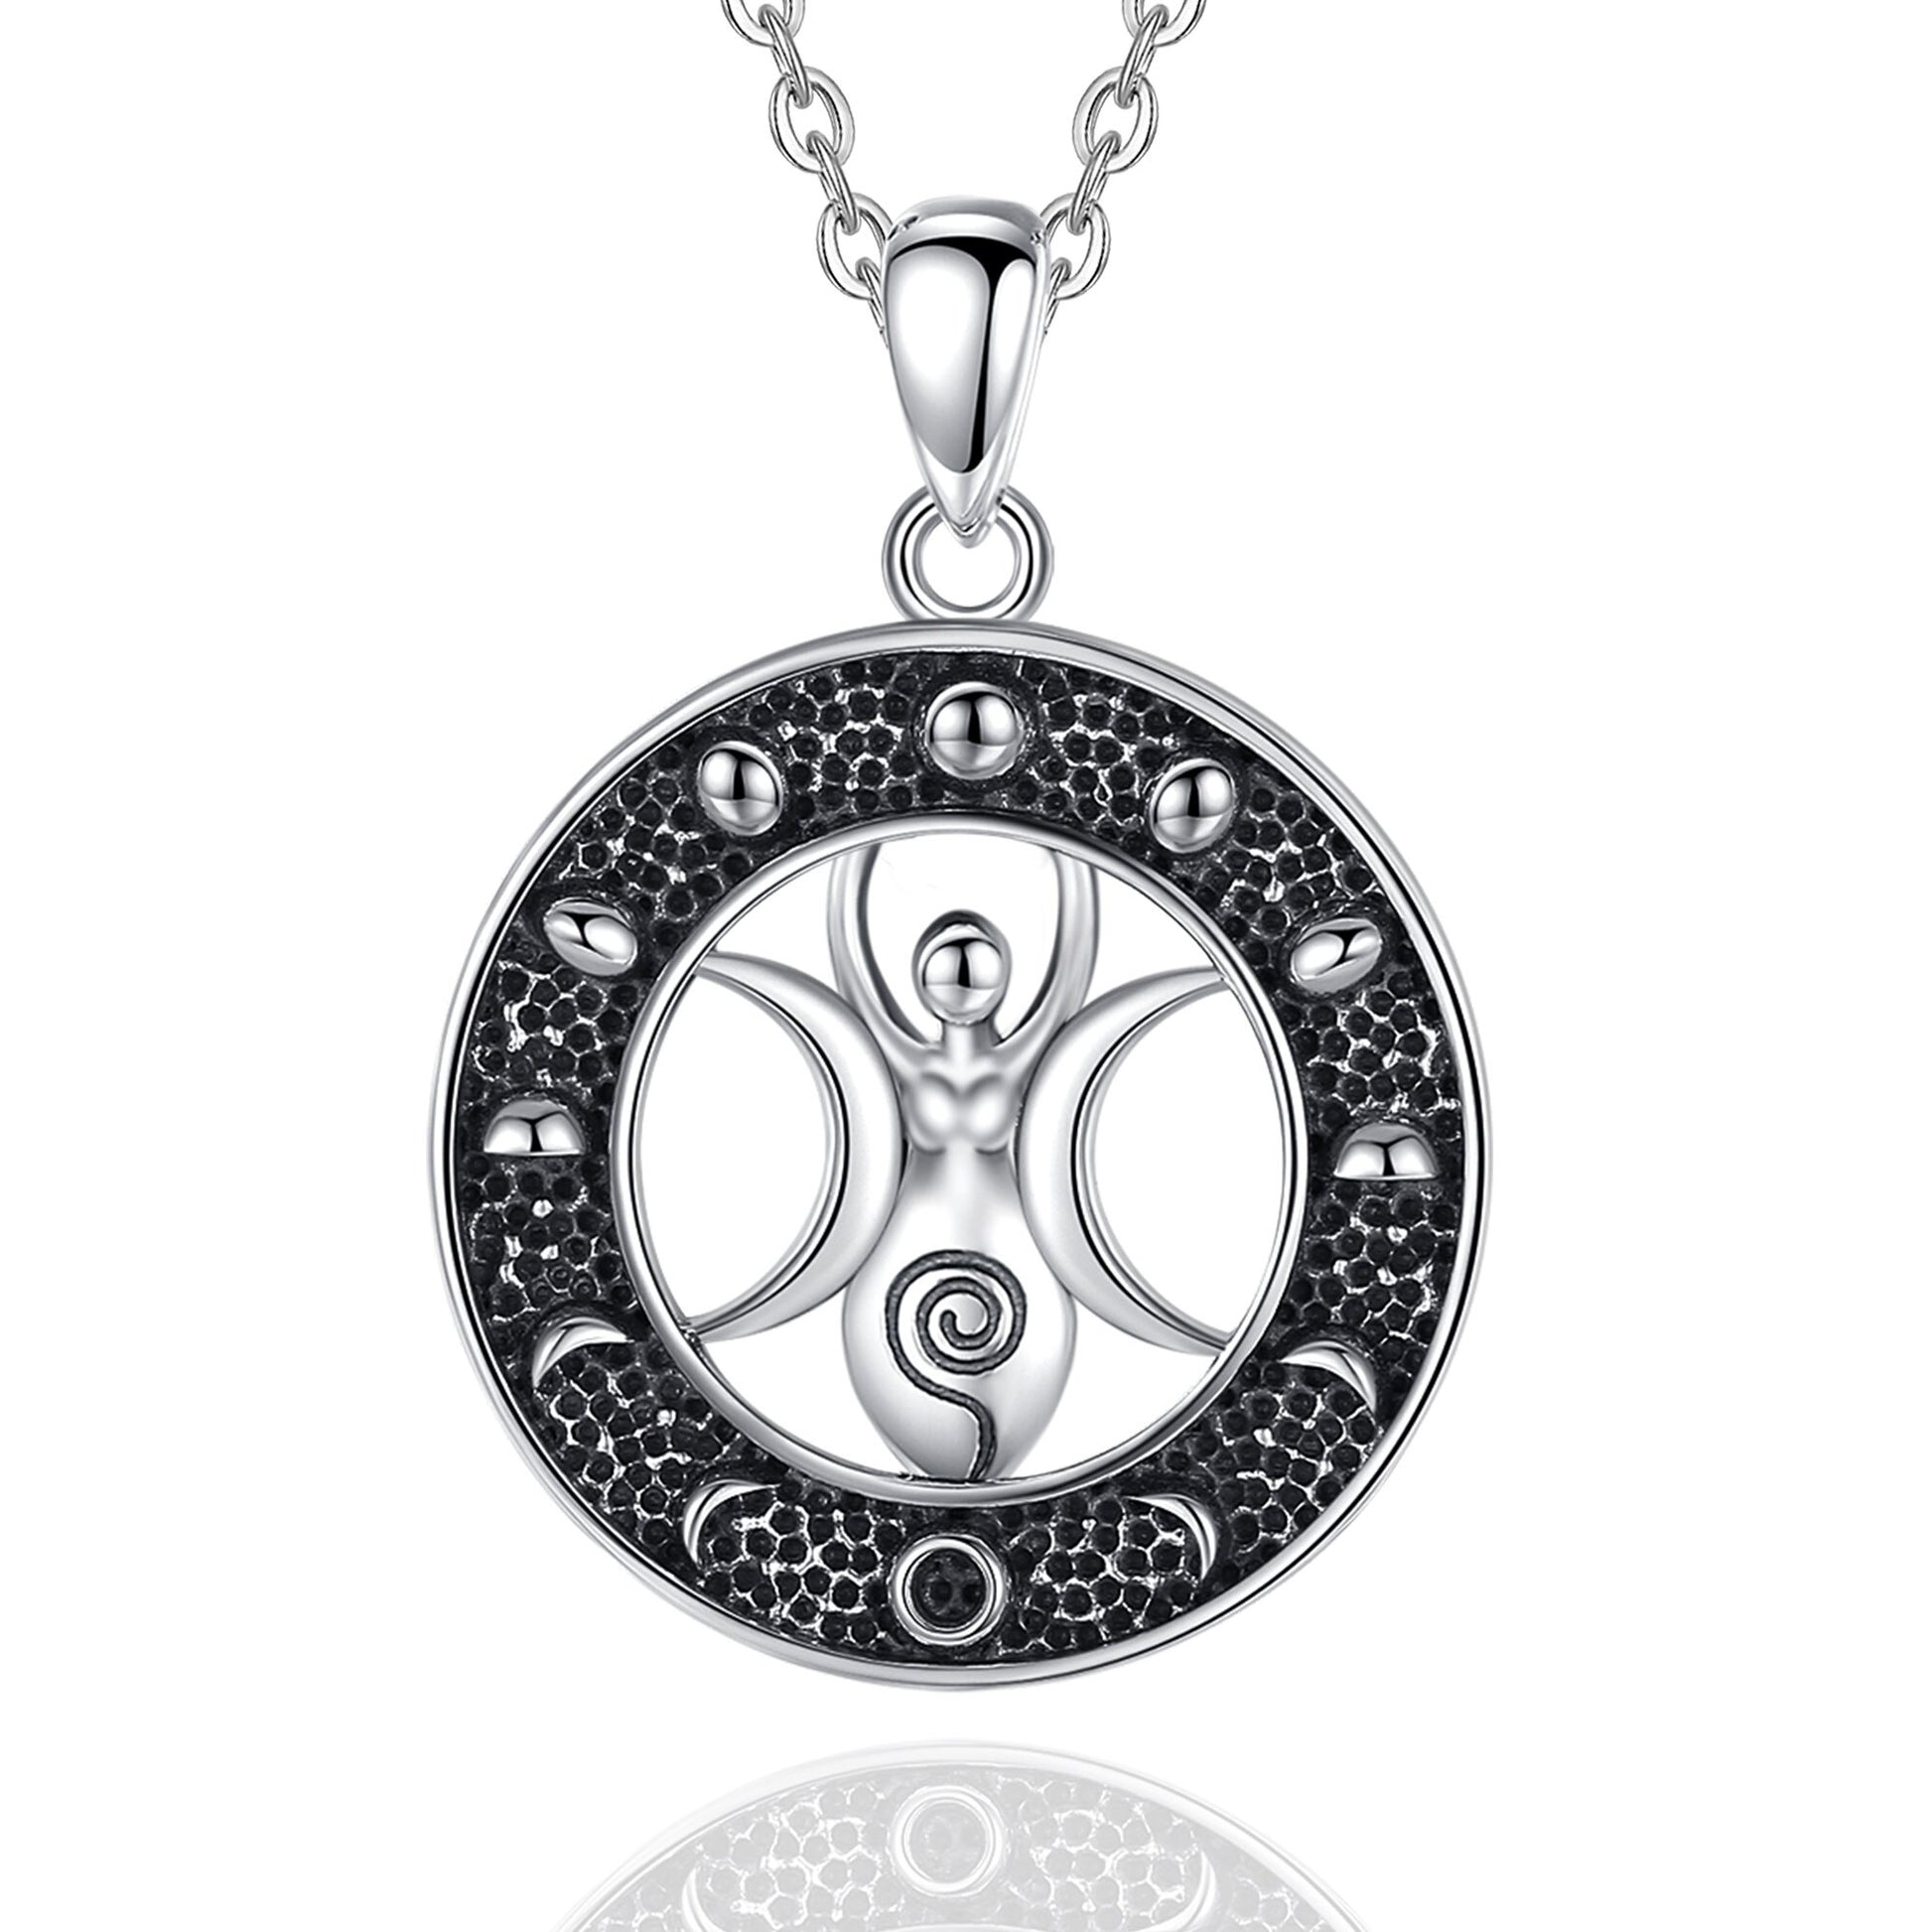 Triple Moon Goddess Necklace Lunar Cycle Moon Phase Necklace-MoonChildWorld